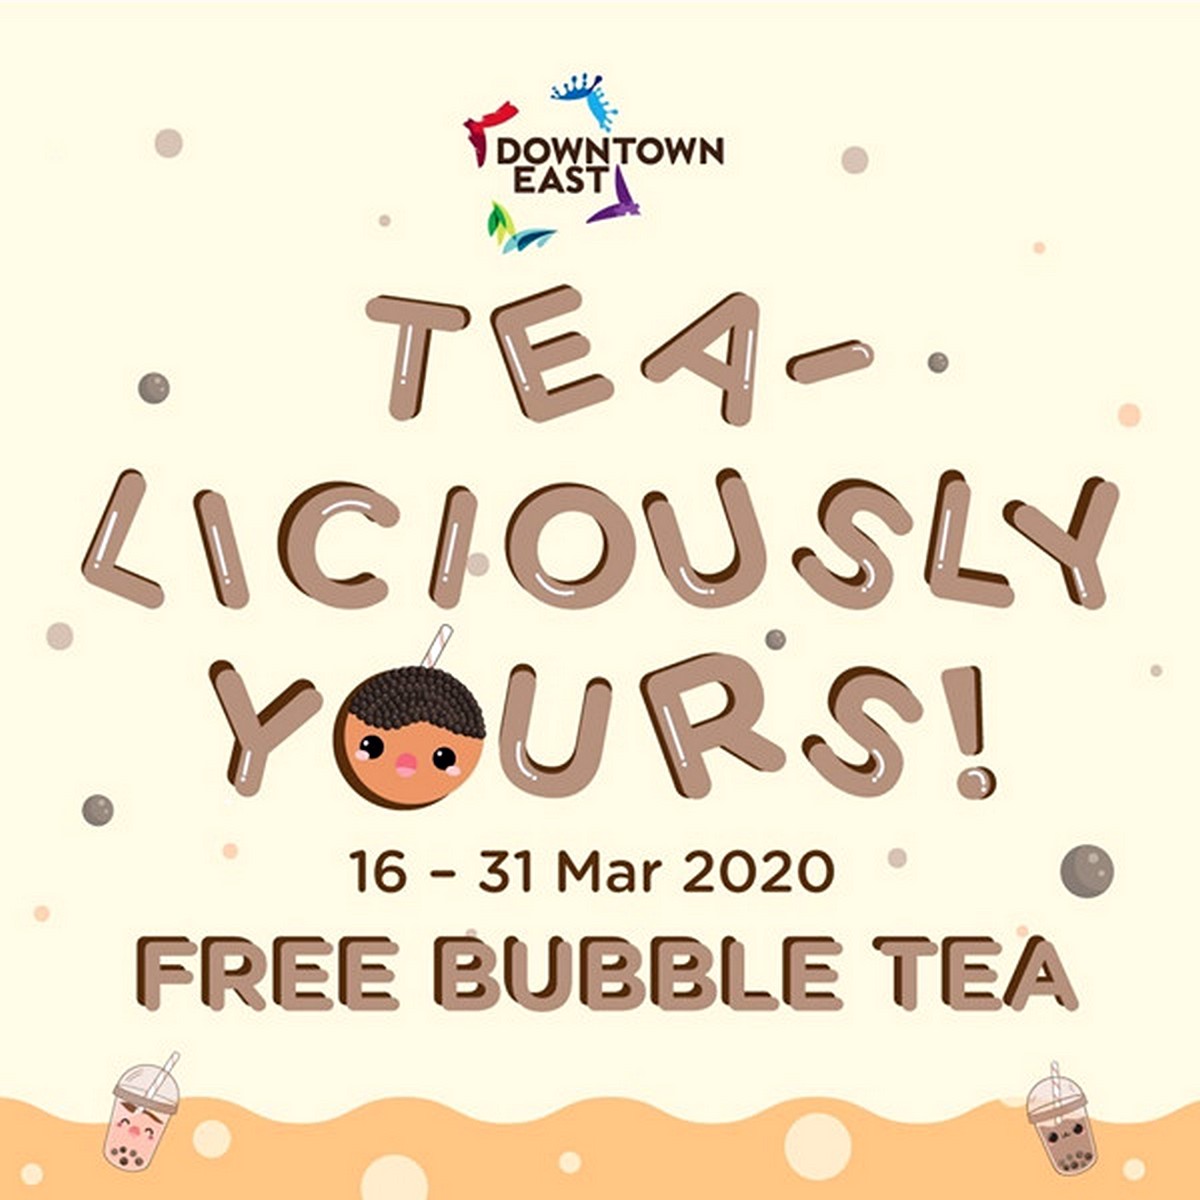 Downtown-East-Free-Bubble-Tea-Promotion-2020-Giveaway-Freebies-2021-Discounts-Offers-007 16-31 Mar 2020: Downtown East FREE Bubble Tea Promotion! KOI The, Kung Fu Tea, Each A Cup, Tea Valley & Yocha!